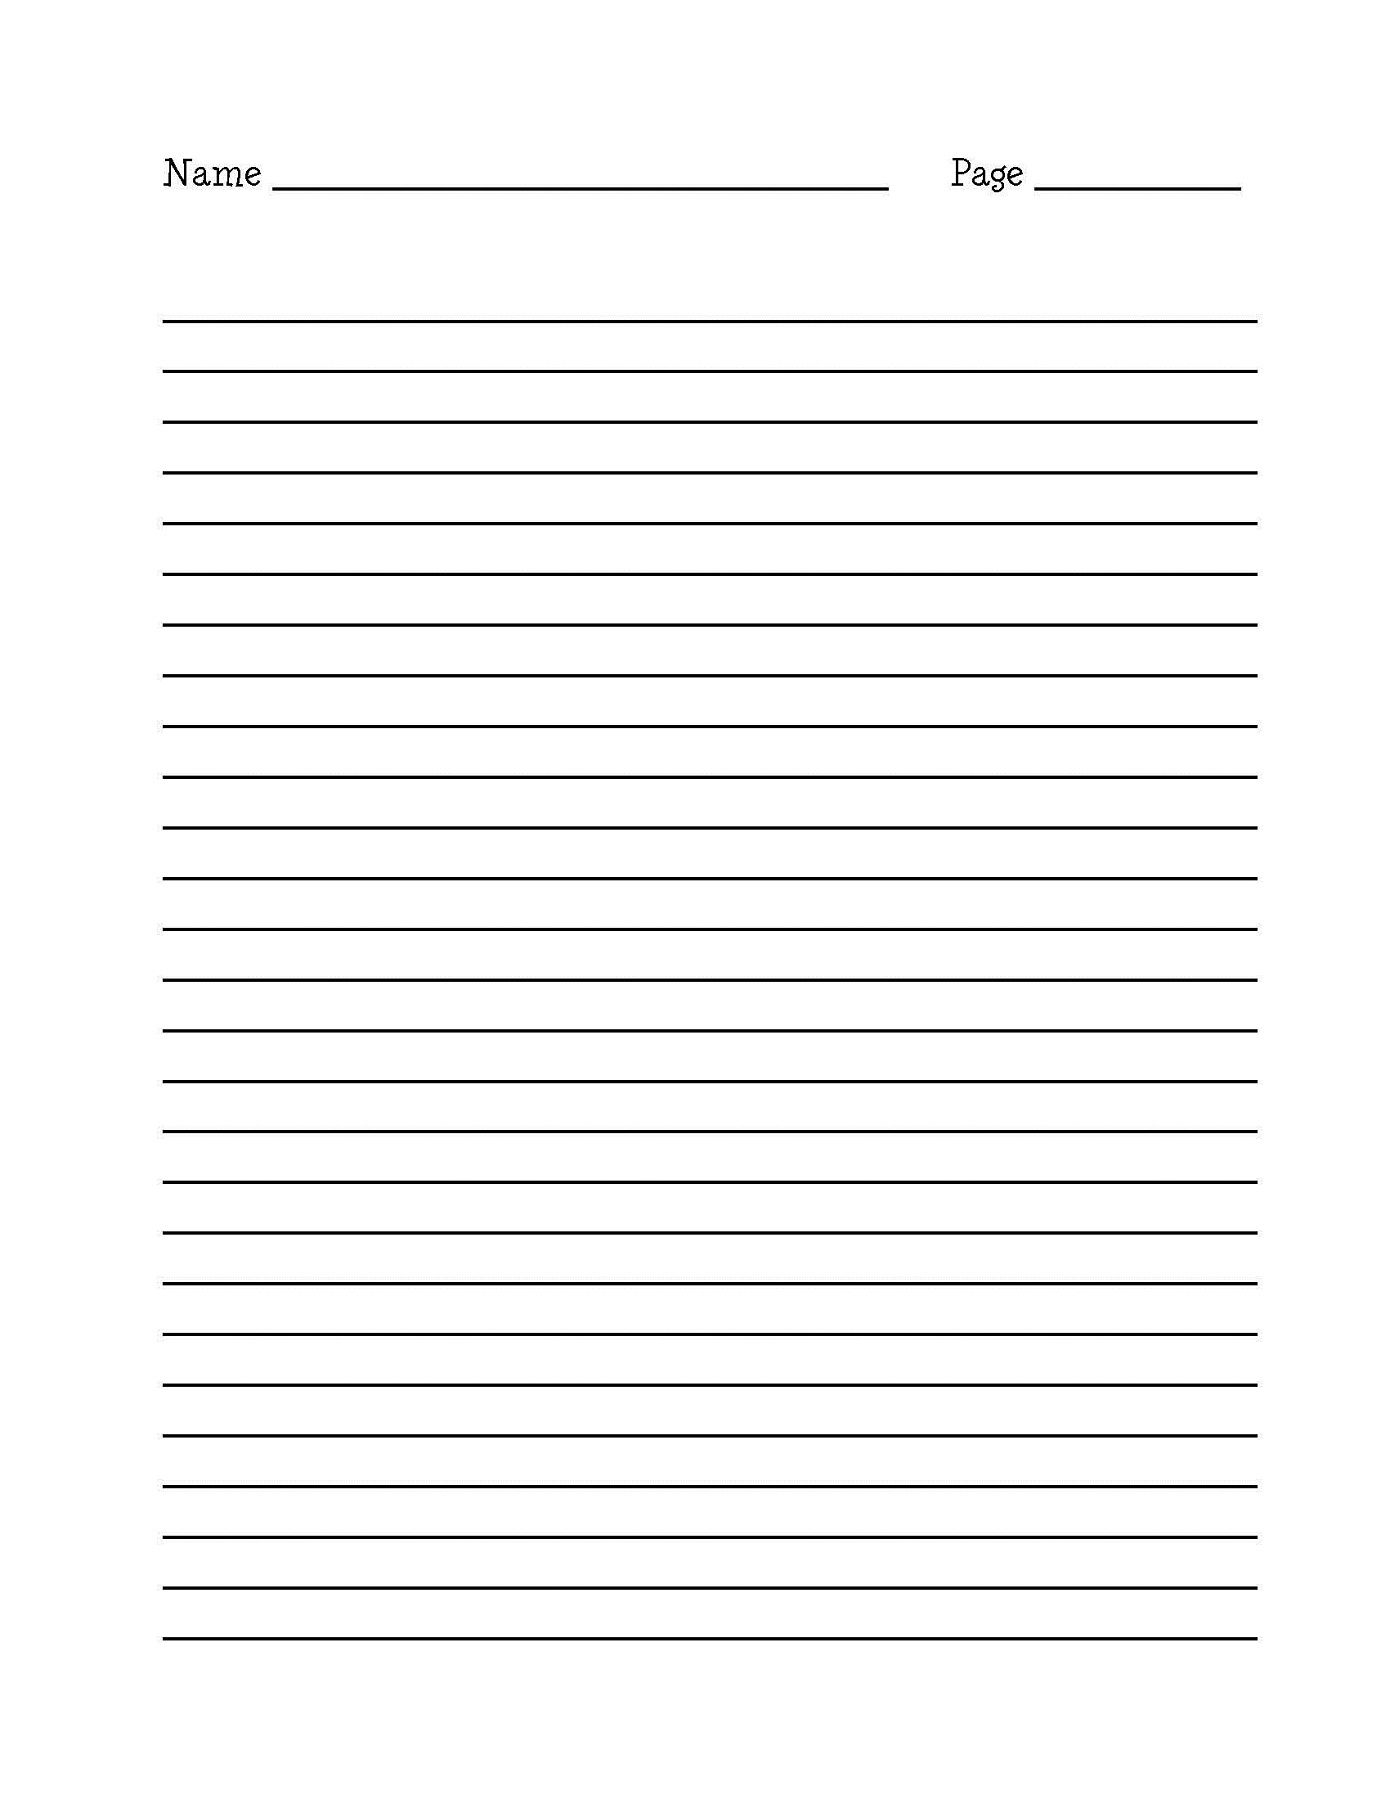 Printable Blank Writing Pages_81227